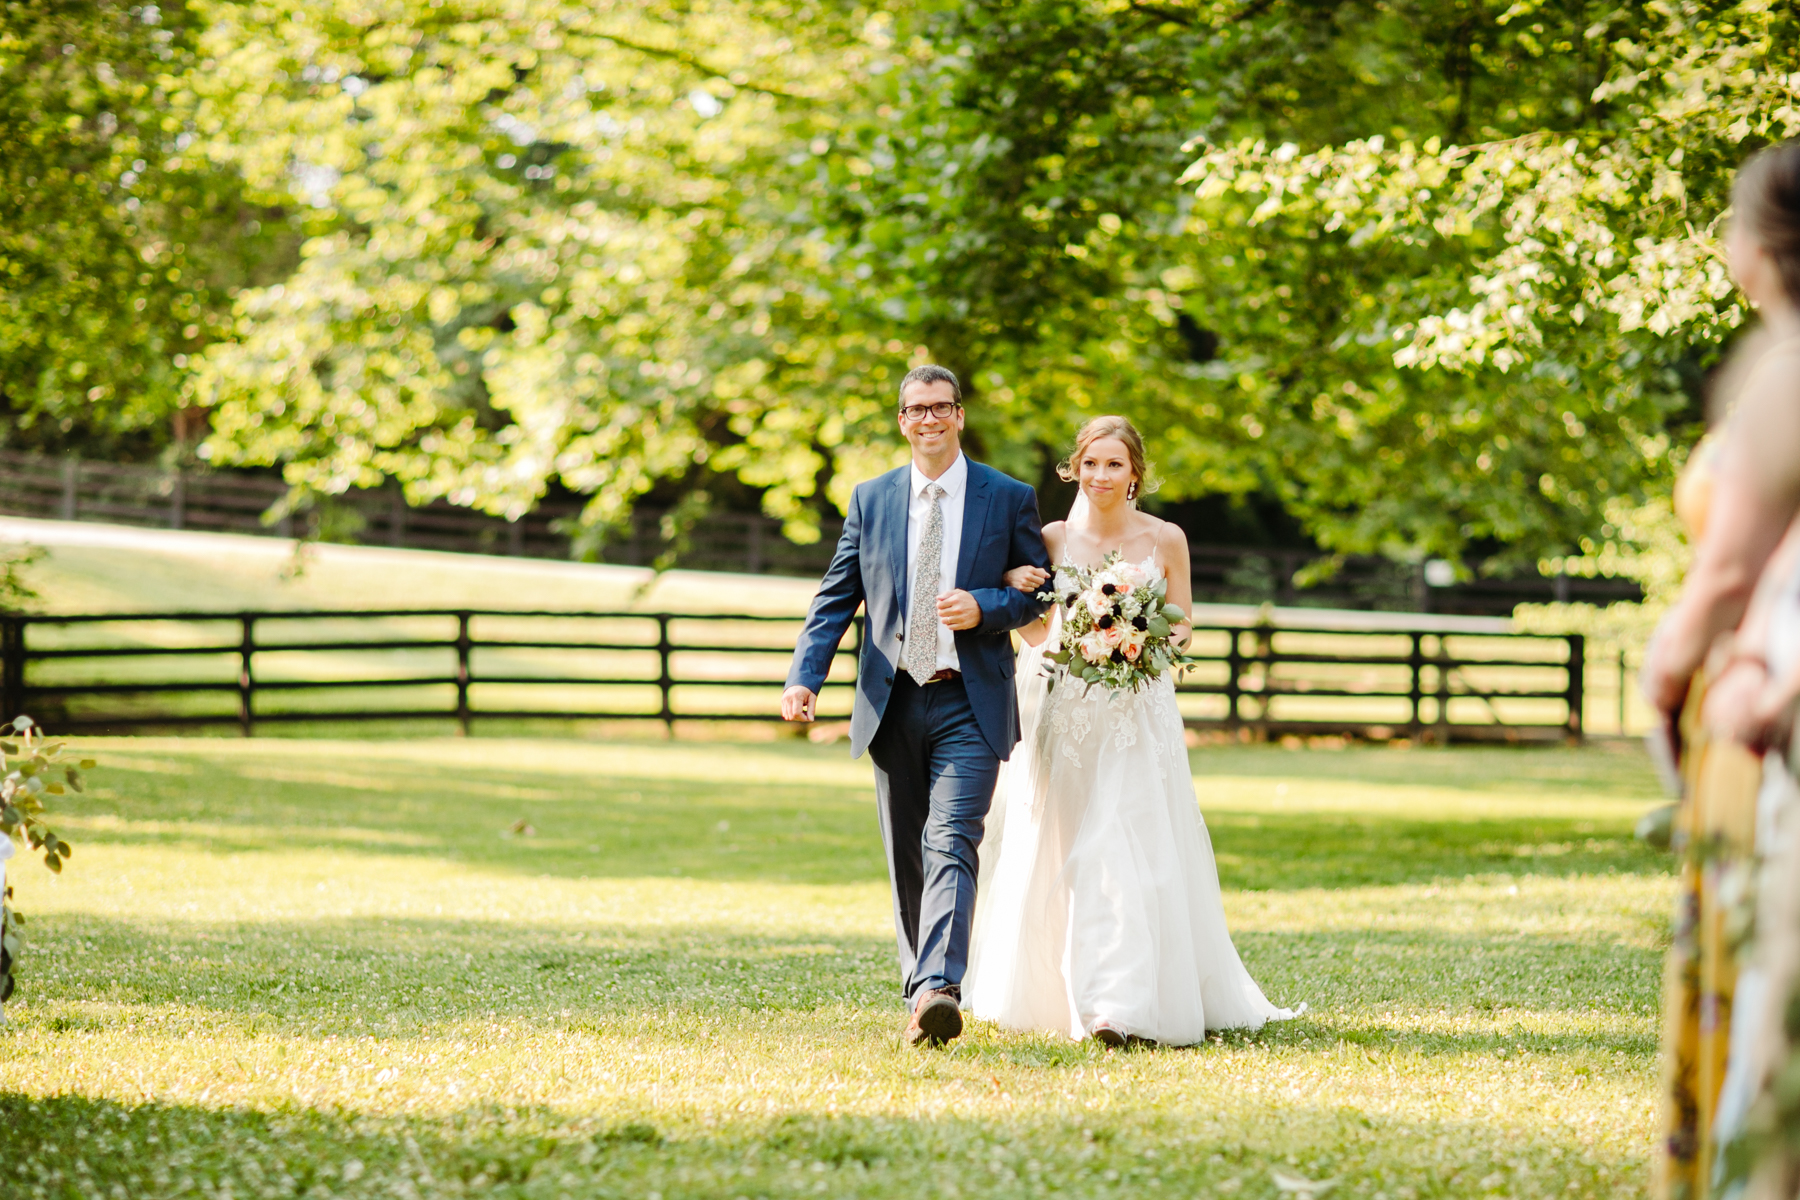 Father walking his daughter down the aisle at her stables at strawberry creek wedding in knoxville, tennessee